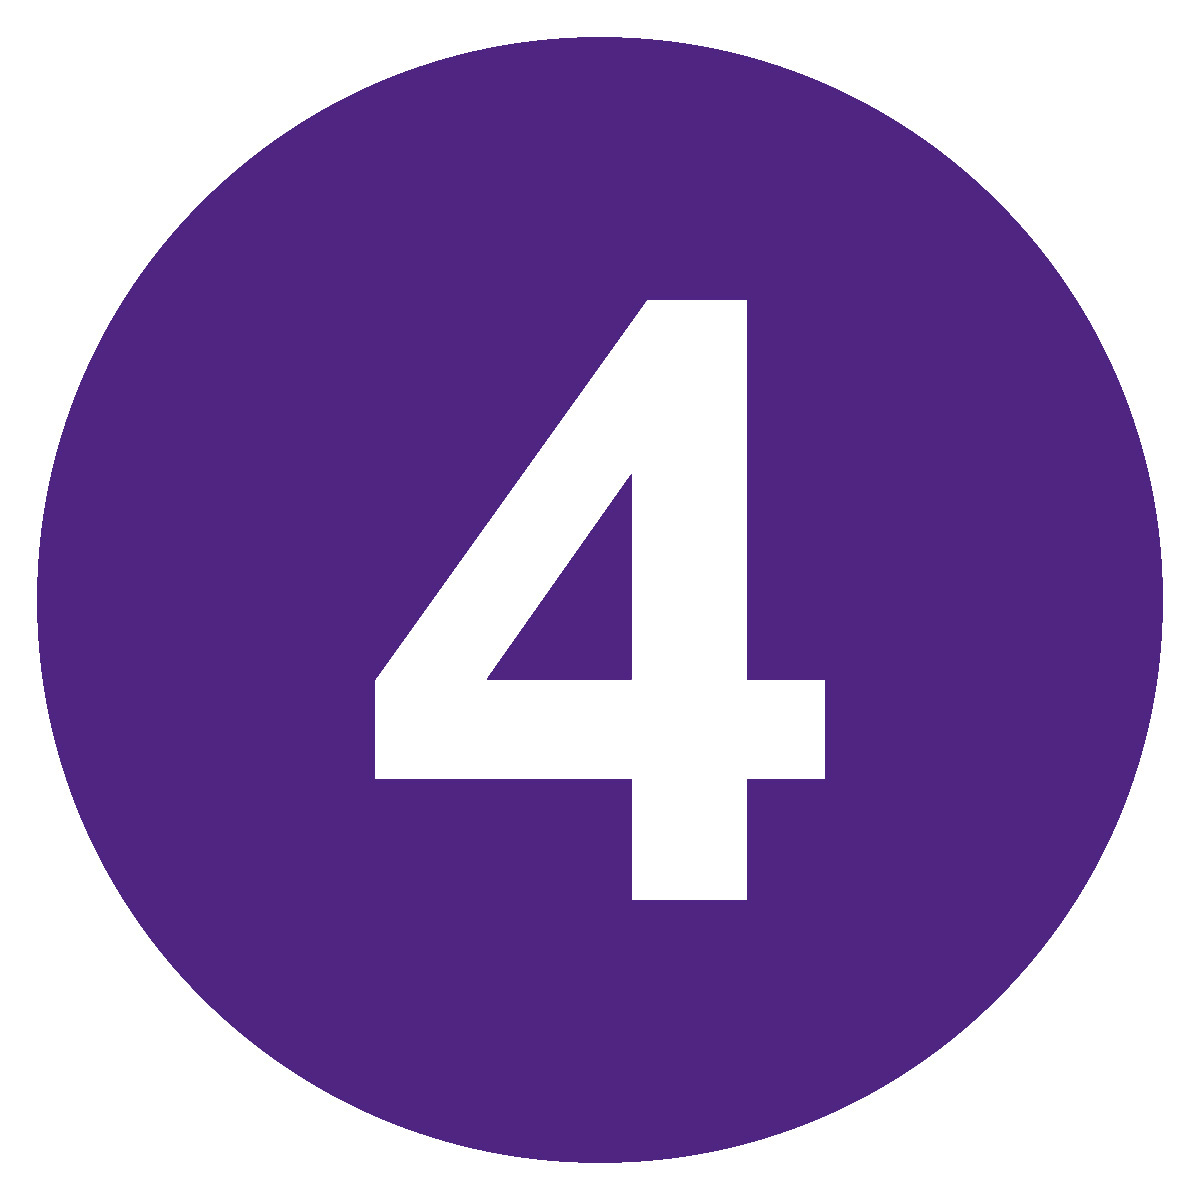 File:Eo circle purple number-4.svg - Wikimedia Commons